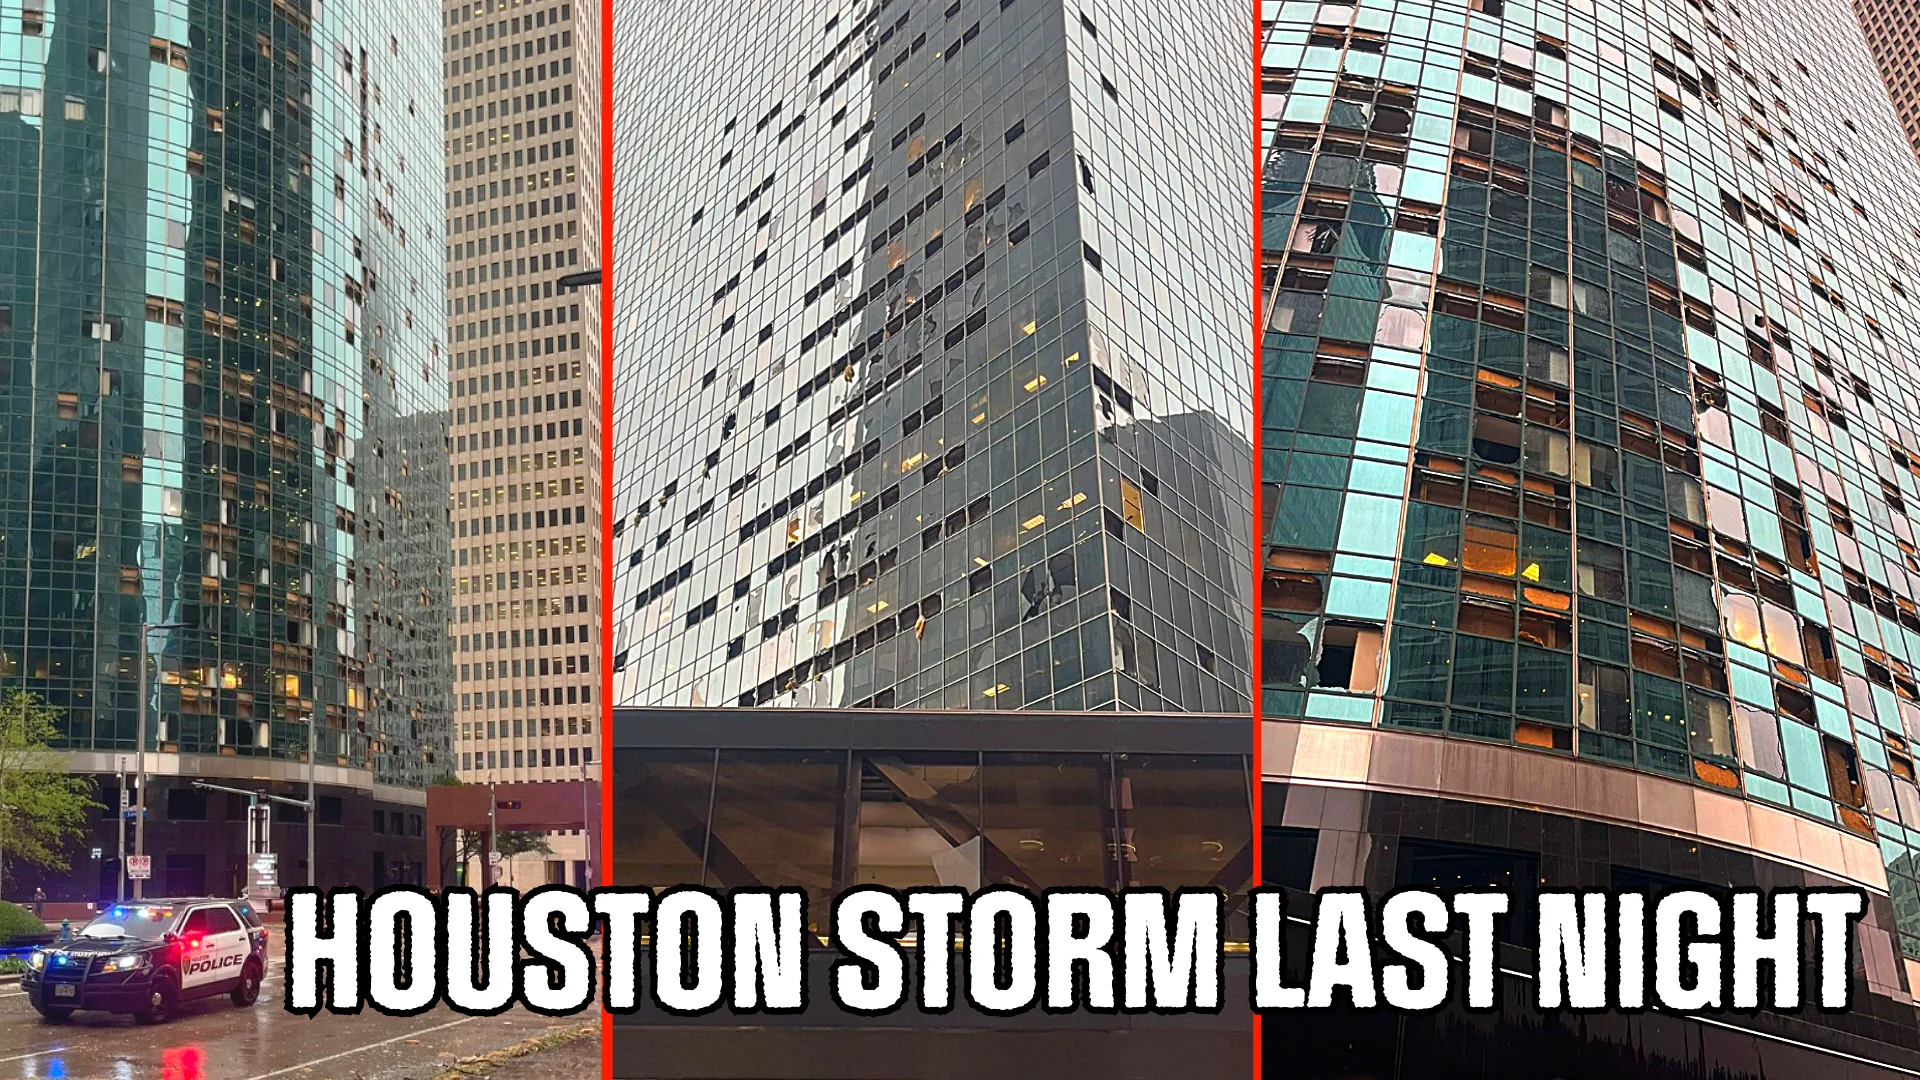 Severe thunderstorms struck southeastern Texas for the second time this month, wreaking havoc on the region. The brutal weather system claimed at least four lives, caused widespread damage, and left nearly 900,000 homes and businesses in the Houston area powerless.